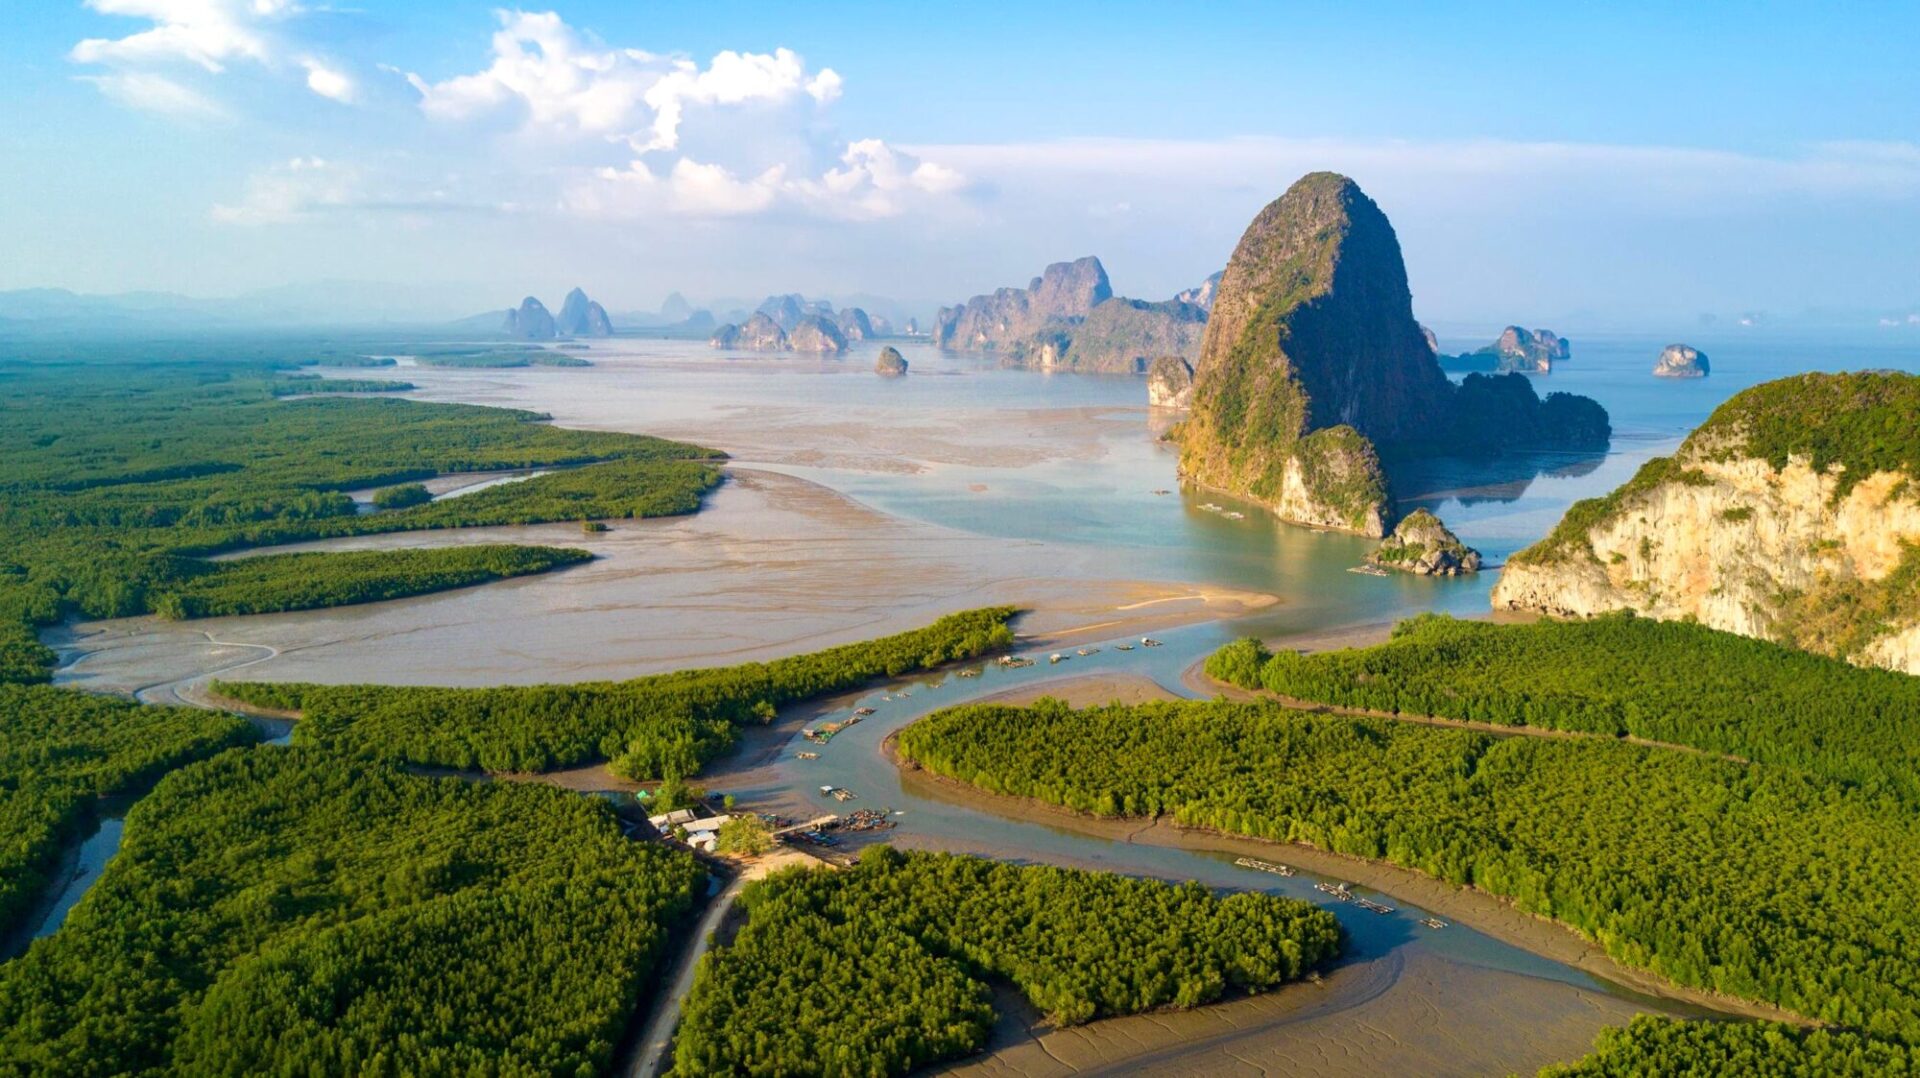 Aerial view of the Phang Nga bay with mangrove tree forest and hills in the Andaman sea, Thailand